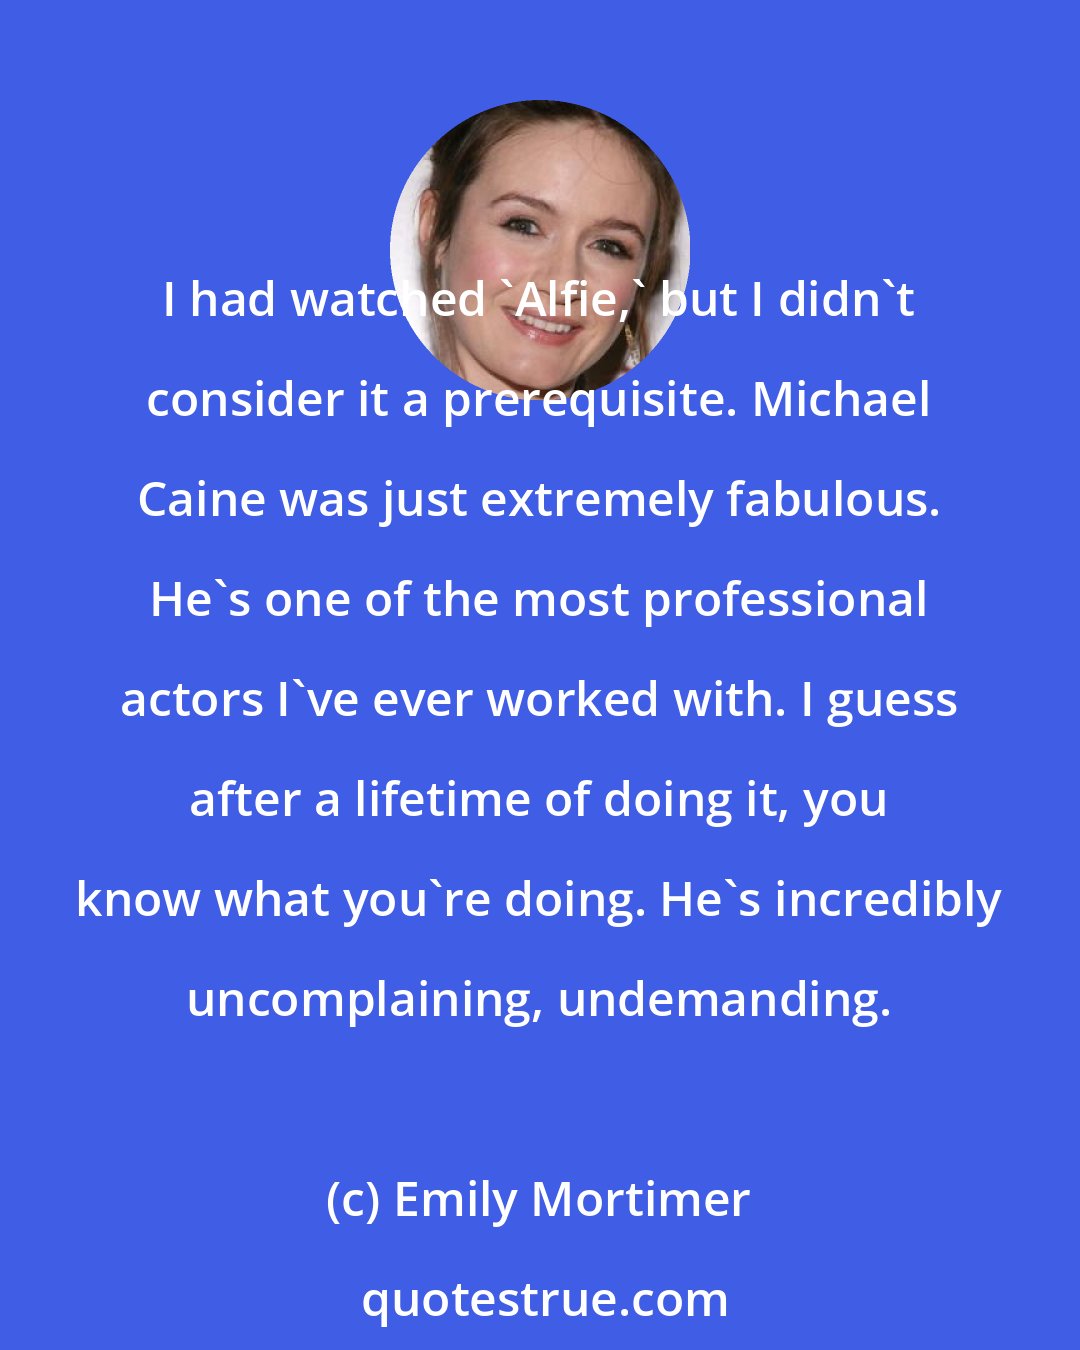 Emily Mortimer: I had watched 'Alfie,' but I didn't consider it a prerequisite. Michael Caine was just extremely fabulous. He's one of the most professional actors I've ever worked with. I guess after a lifetime of doing it, you know what you're doing. He's incredibly uncomplaining, undemanding.